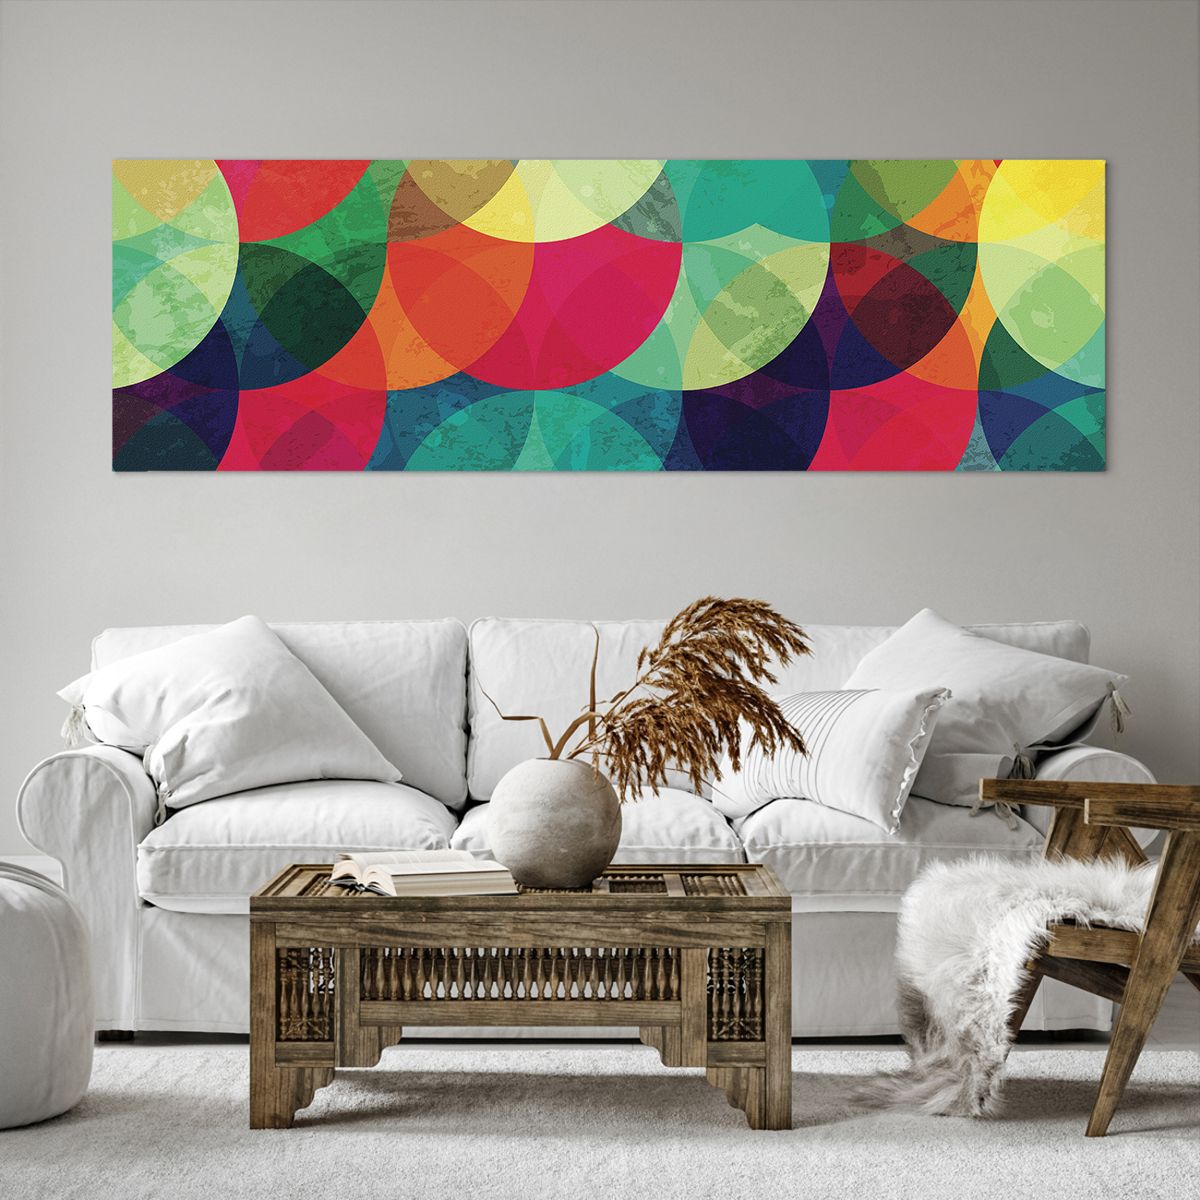 Canvas picture Abstraction, Canvas picture Art, Canvas picture Colorful Circles, Canvas picture Modern Art, Canvas picture Artistic Art